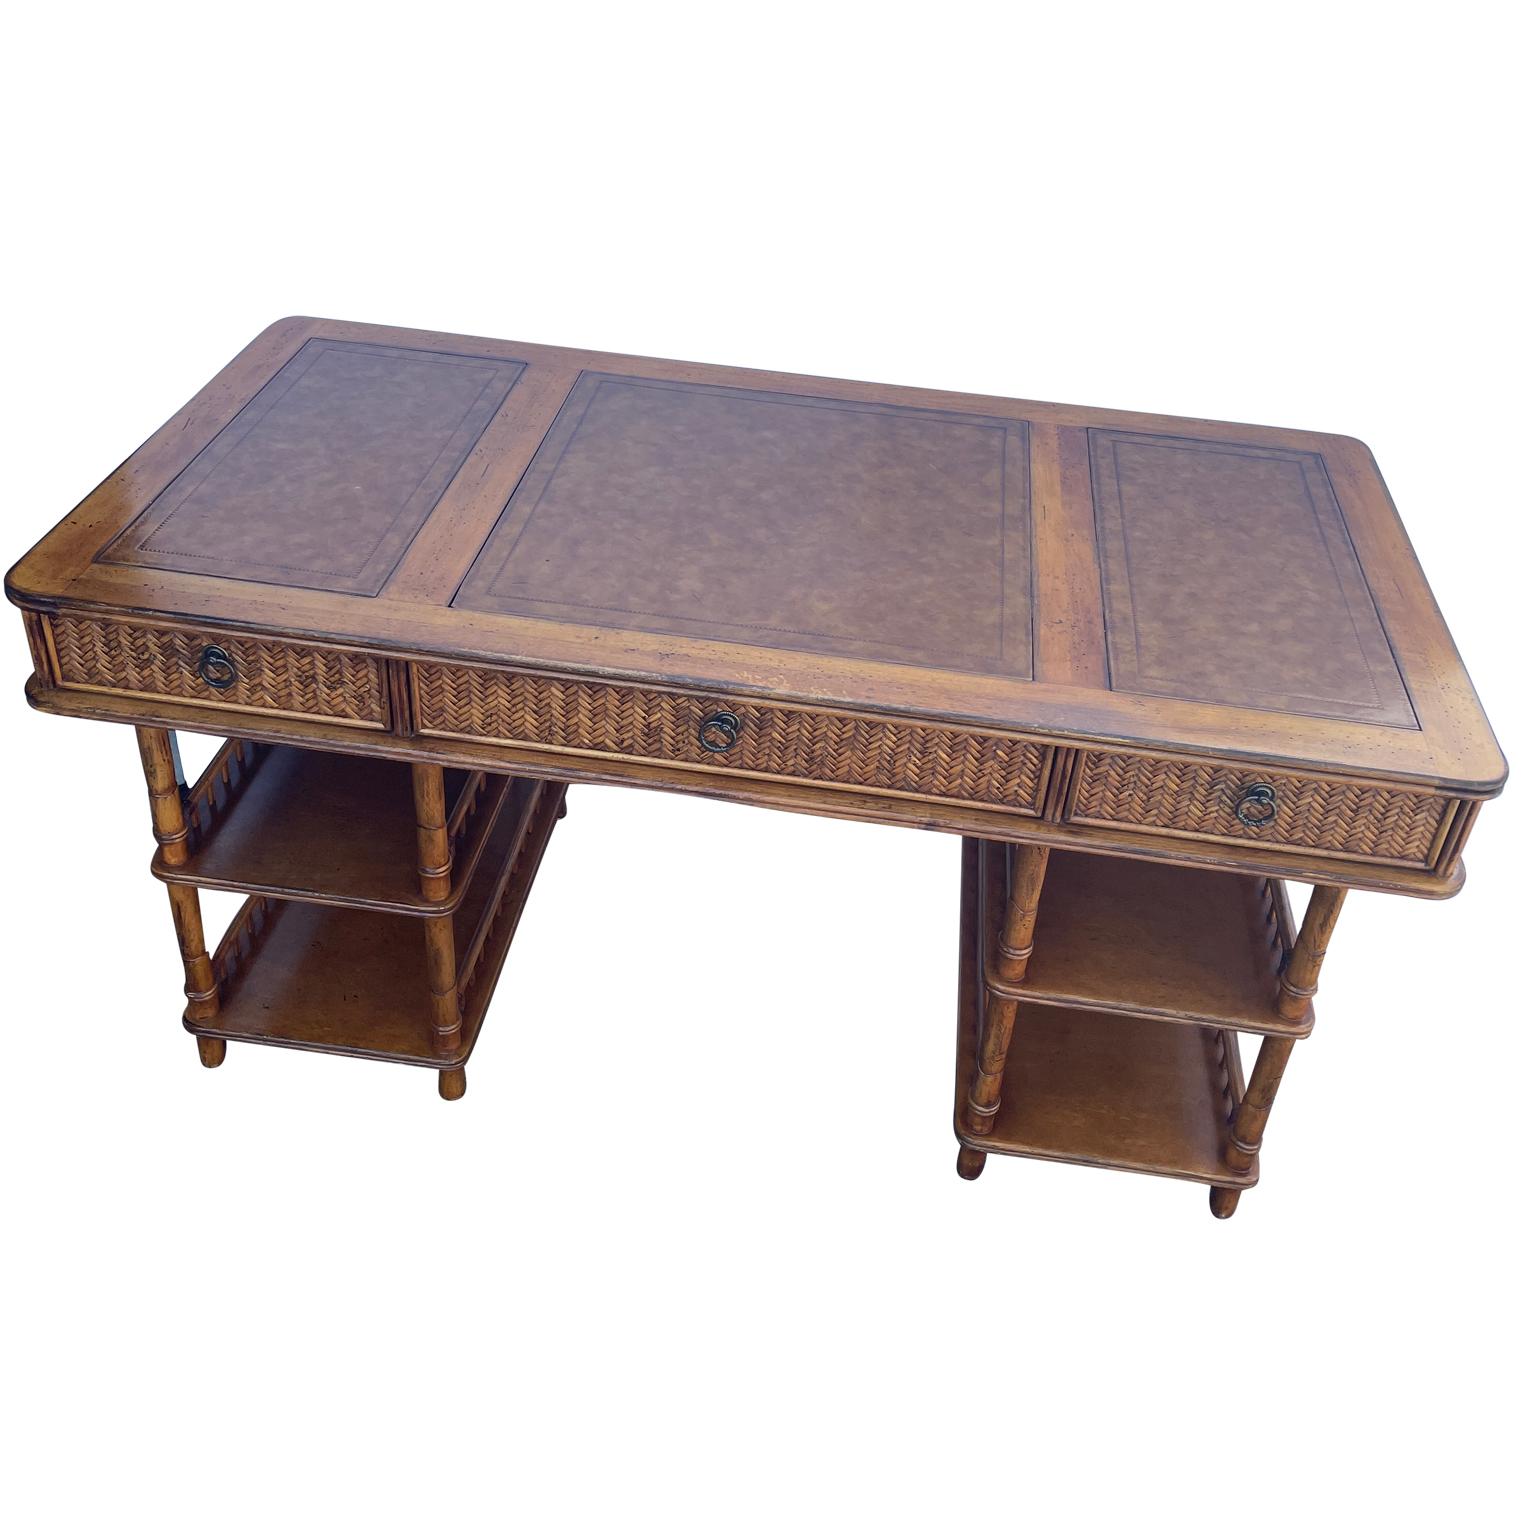 Faux bamboo writing desk in colonial style with leather inset top

A British Colonial style writing desk with decorative rattan and bamboo pattern and leather inset on writing surface. Maker's mark to interior of top drawer. This is a beautiful